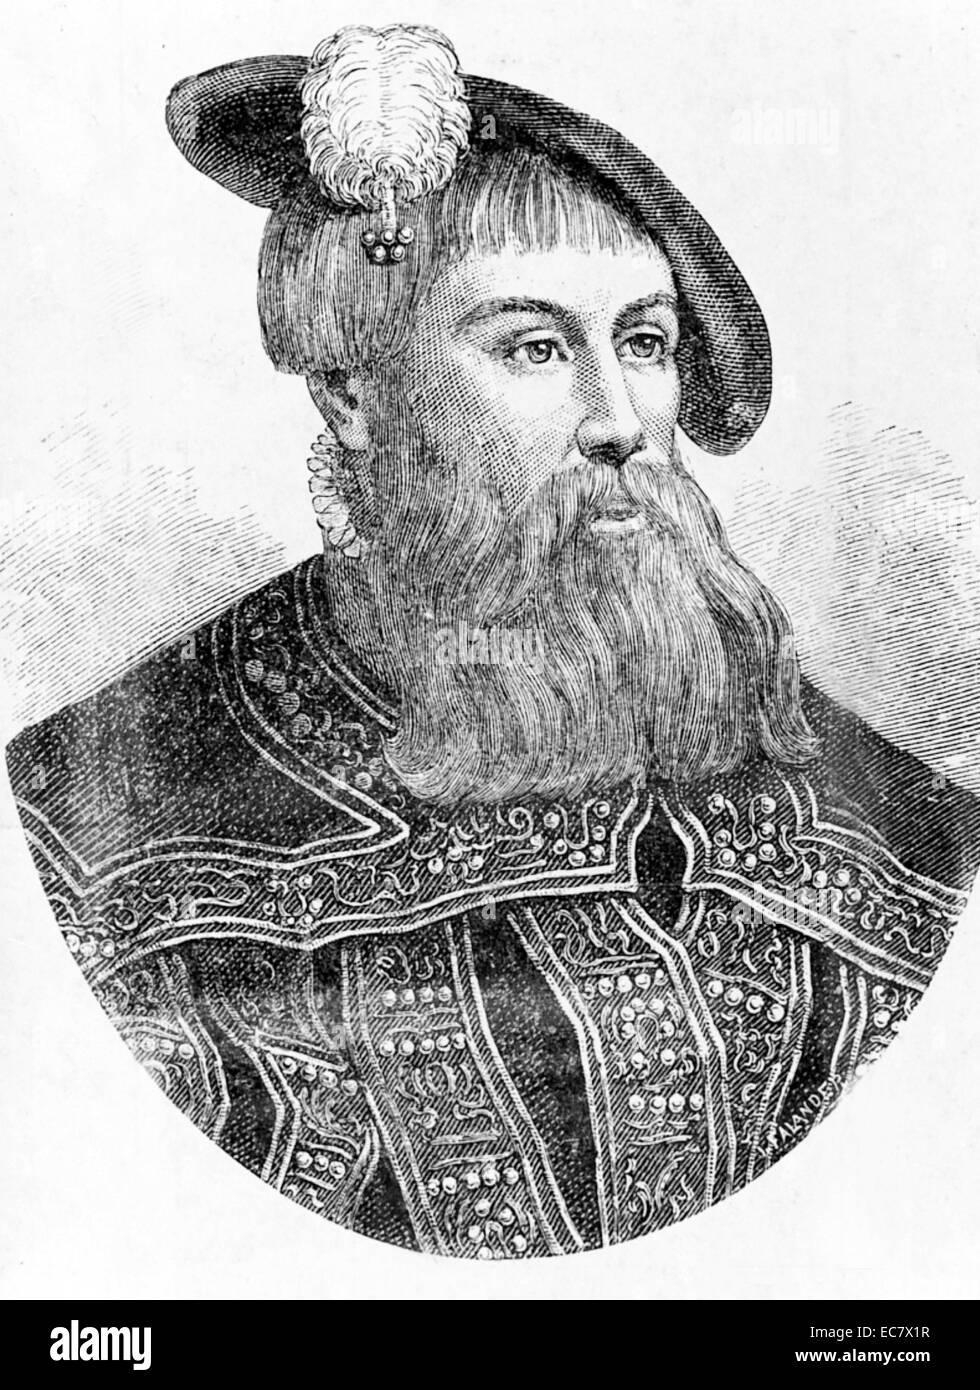 Gustav I, also known as Gustav Vasa (12 May 1496 – 29 September 1560), was King of Sweden from 1523 until his death, previously self-recognised Protector of the Realm (Rikshövitsman) from 1521, during the ongoing Swedish War of Liberation against King Christian II of Denmark, Norway and Sweden. Gustav's election as King on 6 June 1523 and his triumphant entry into Stockholm eleven days later meant the end of Medieval Sweden's elective monarchy as well as the Kalmar Union. This created a hereditary monarchy under the House of Vasa and its successors, including the current House of Bernadotte. Stock Photo